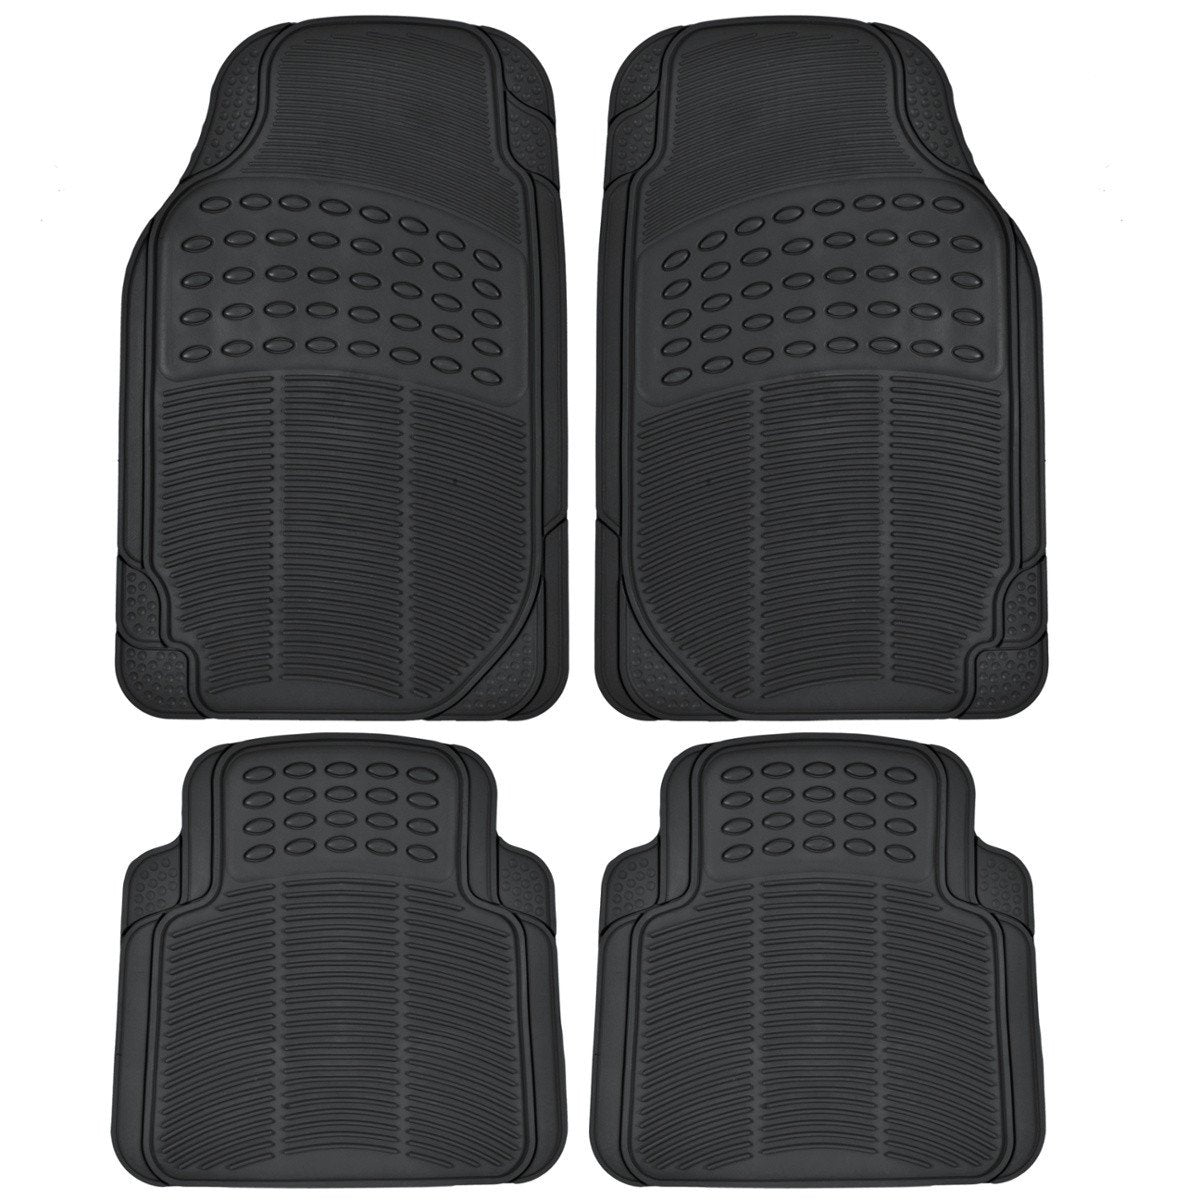 BDK 4-Piece Rubber Transparent Clear Floor Mats Heavy Duty for Front & Rear Car Truck Van SUV, All Weather Protection, Universal Fit - Beige:#E1C699